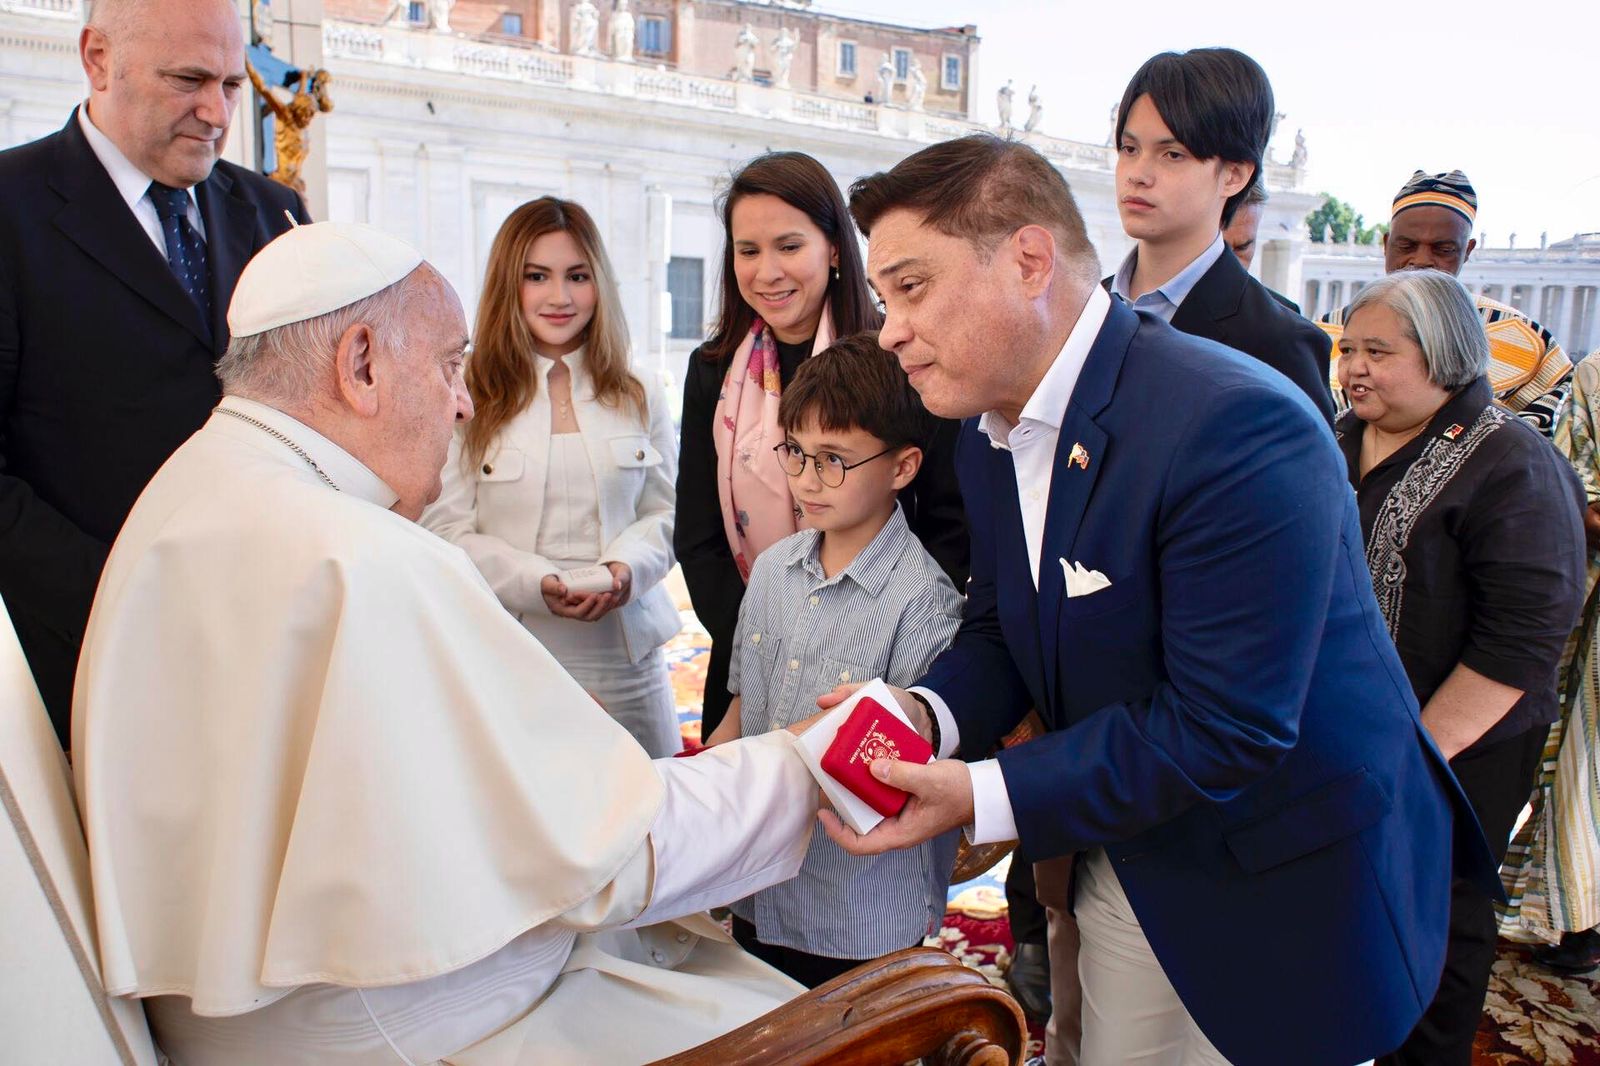 Pope Francis tells Zubiri to 'protect the family'